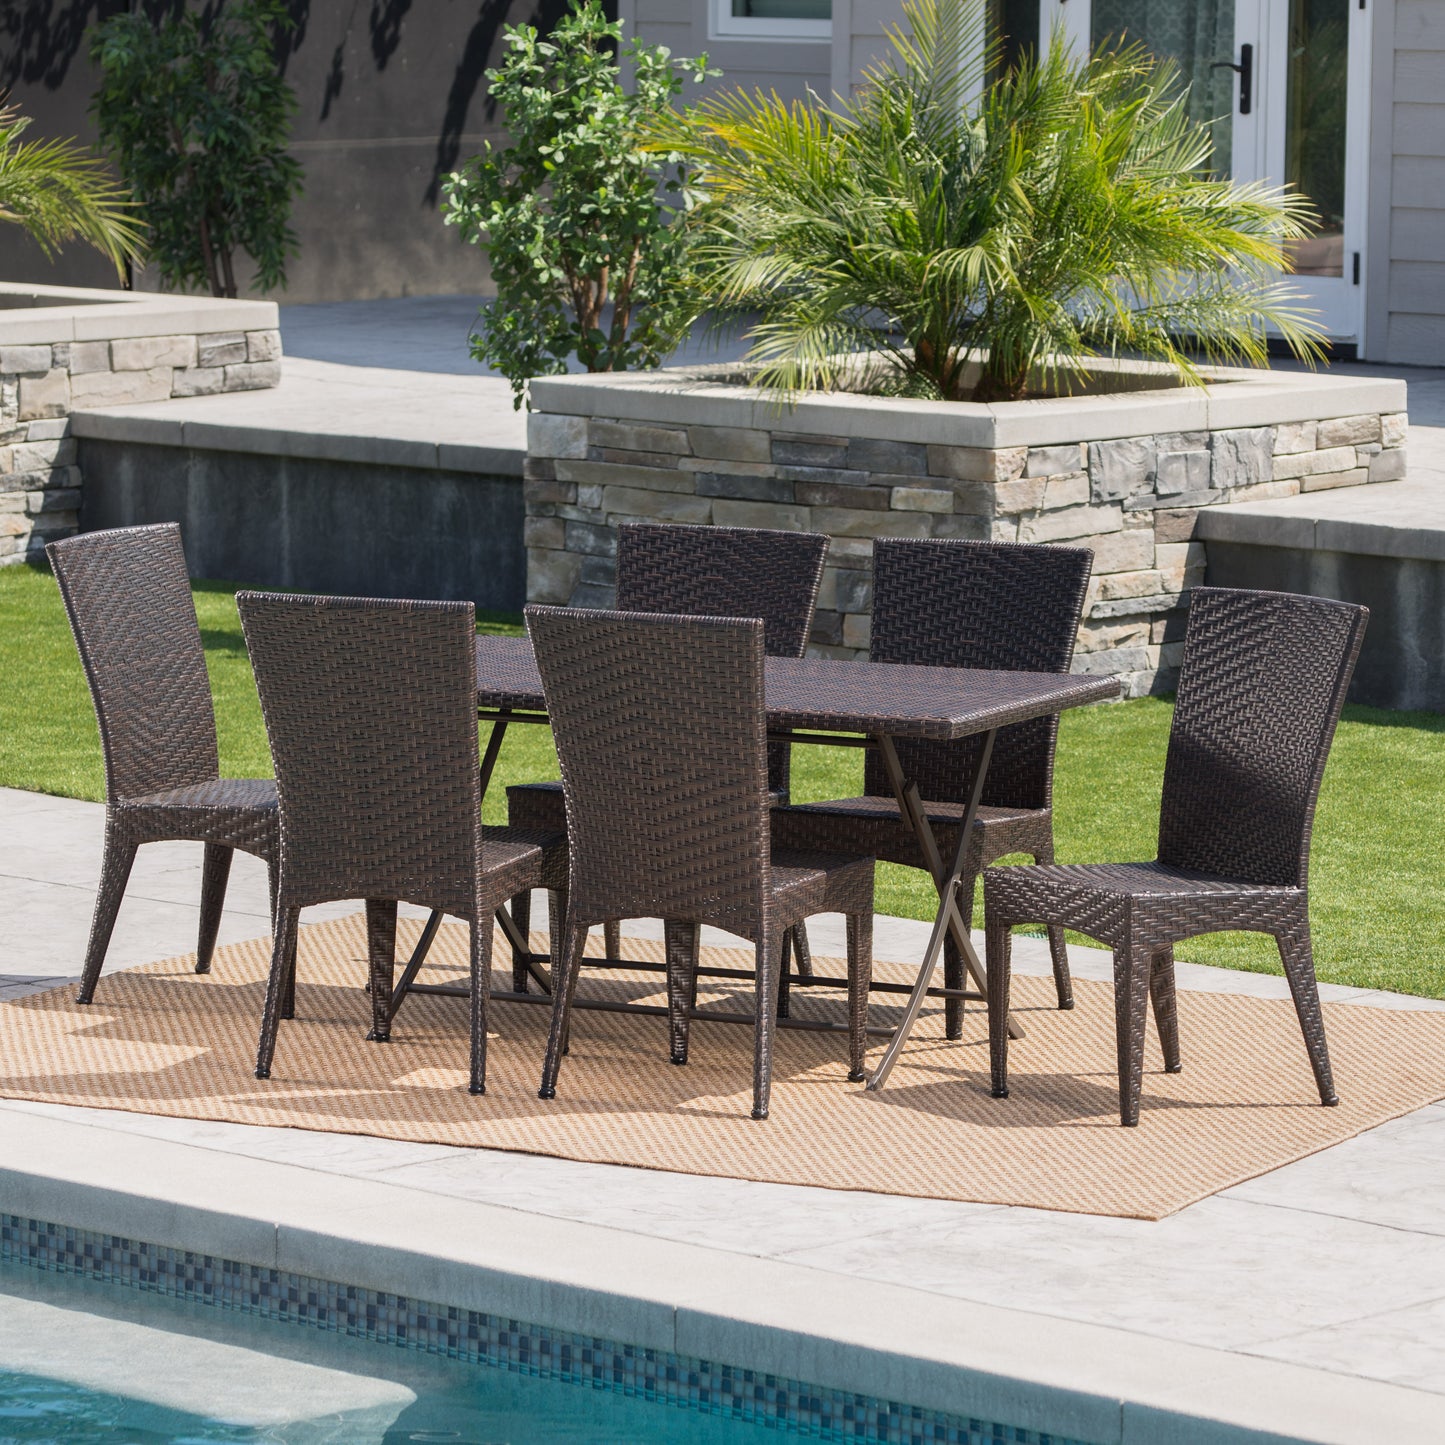 Adia Outdoor 7 Piece Multi-brown Wicker Dining Set with Foldable Table